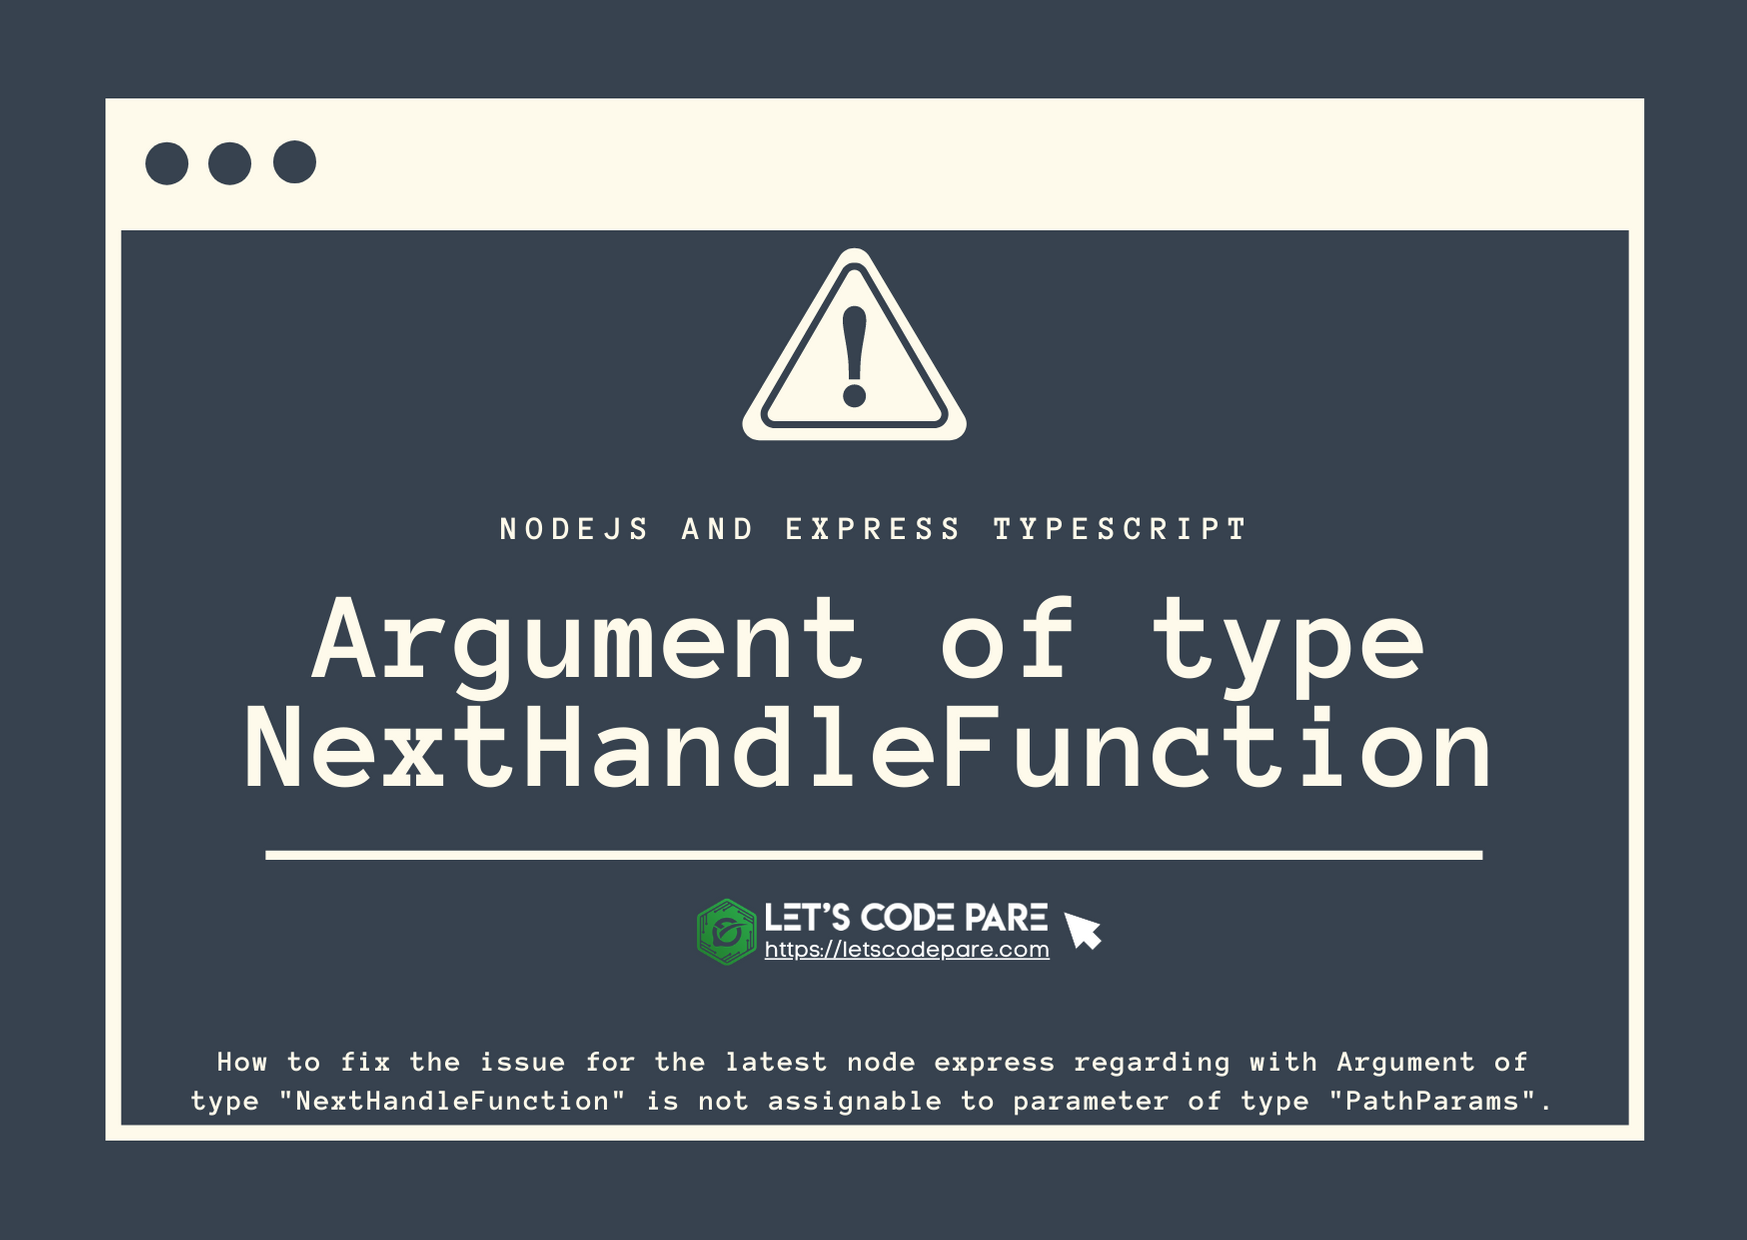 Argument of type NextHandleFunction is not assignable to parameter of type PathParams